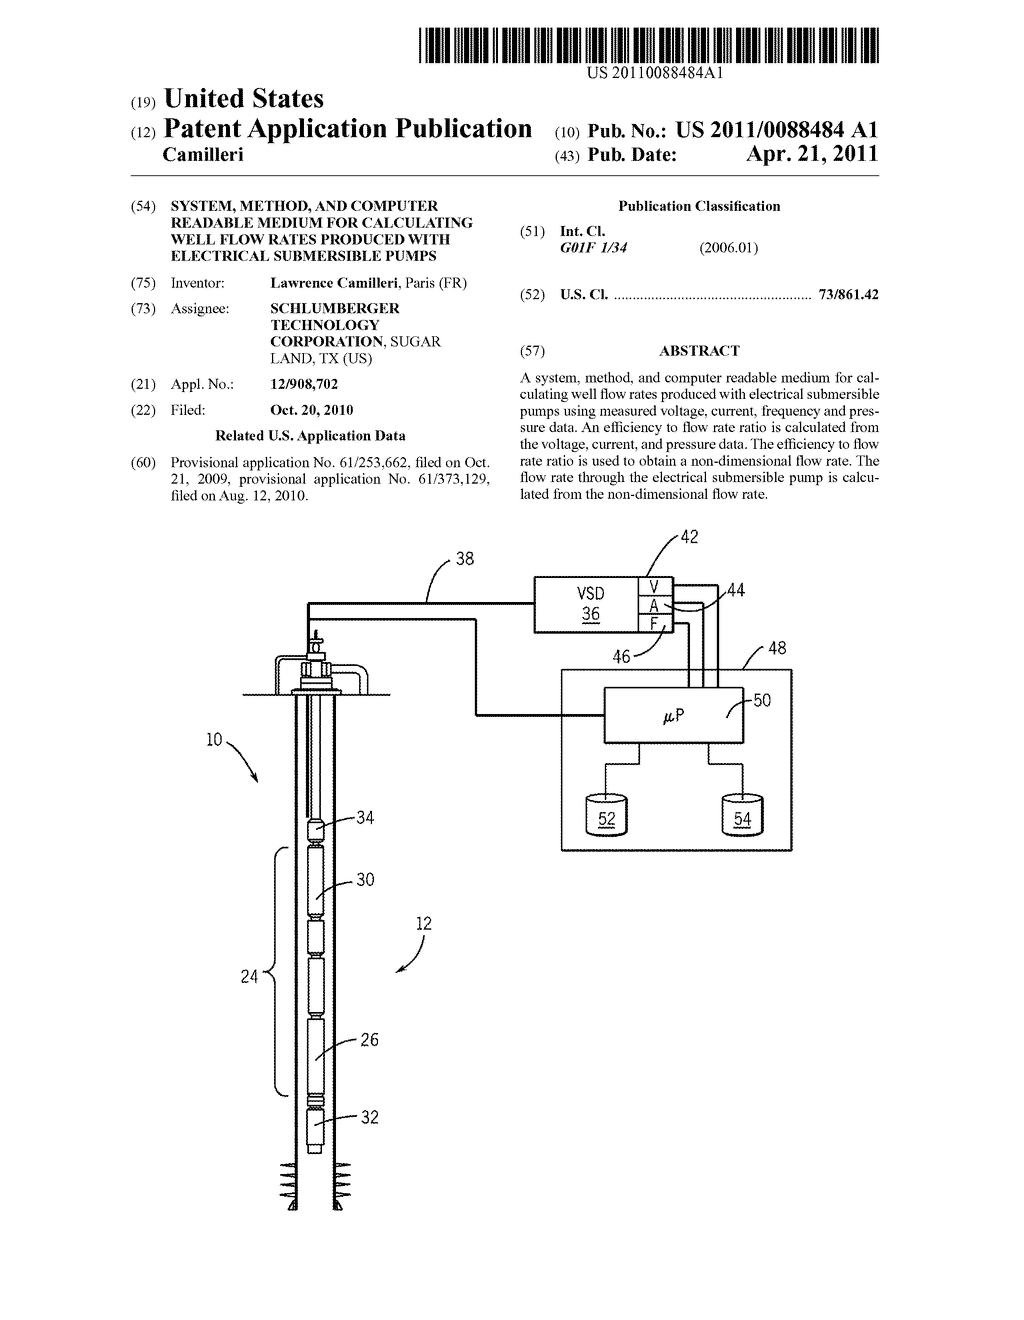 SYSTEM, METHOD, AND COMPUTER READABLE MEDIUM FOR CALCULATING WELL FLOW RATES PRODUCED WITH ELECTRICAL SUBMERSIBLE PUMPS - diagram, schematic, and image 01